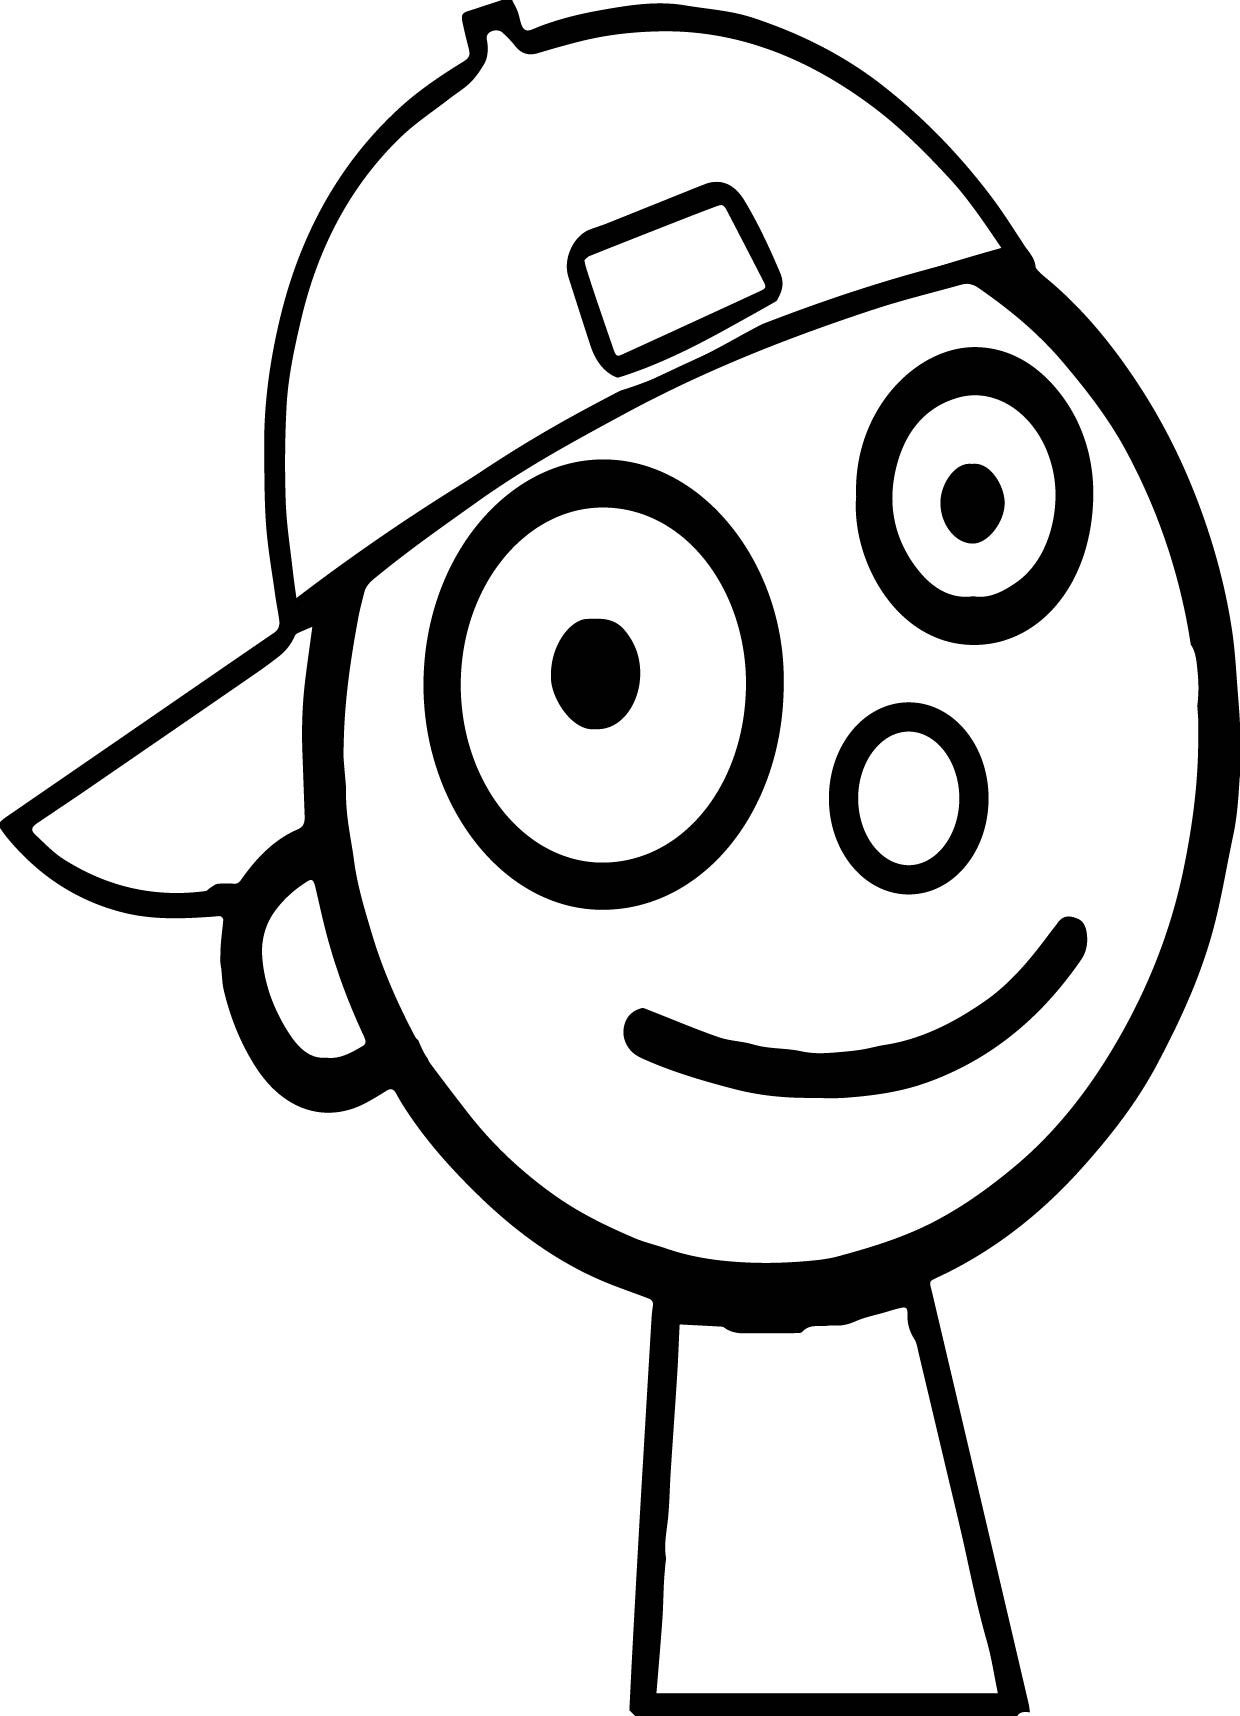 Pbs Kids Coloring Sheets
 Pbs Kids Colouring Pages Sketch Coloring Page